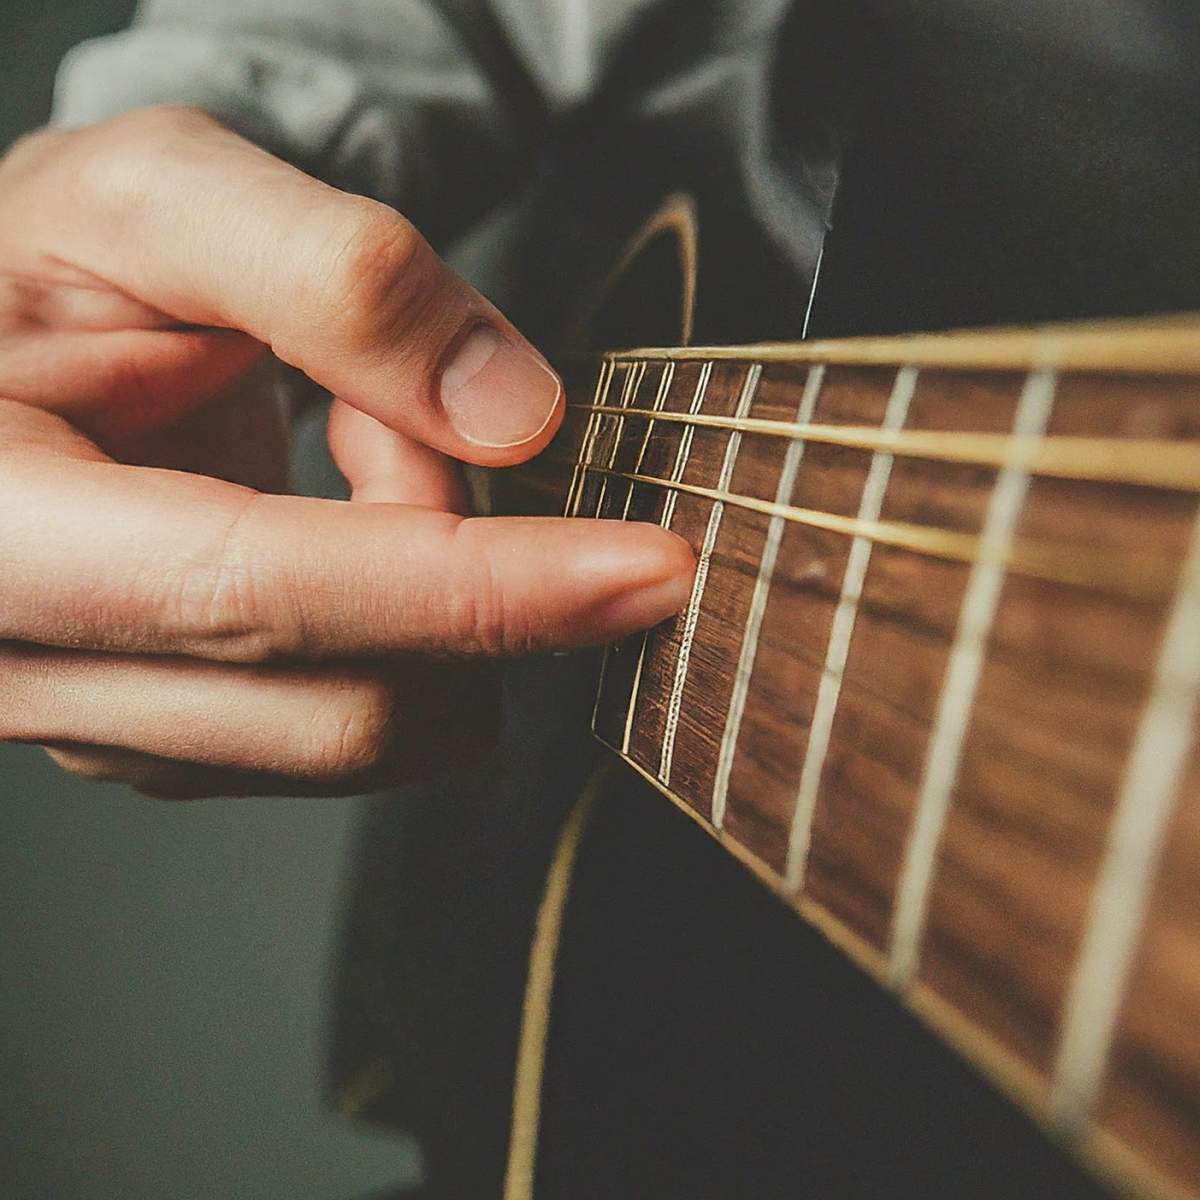 An index finger touching the node on the guitar string, exactly like for cascading harmonics